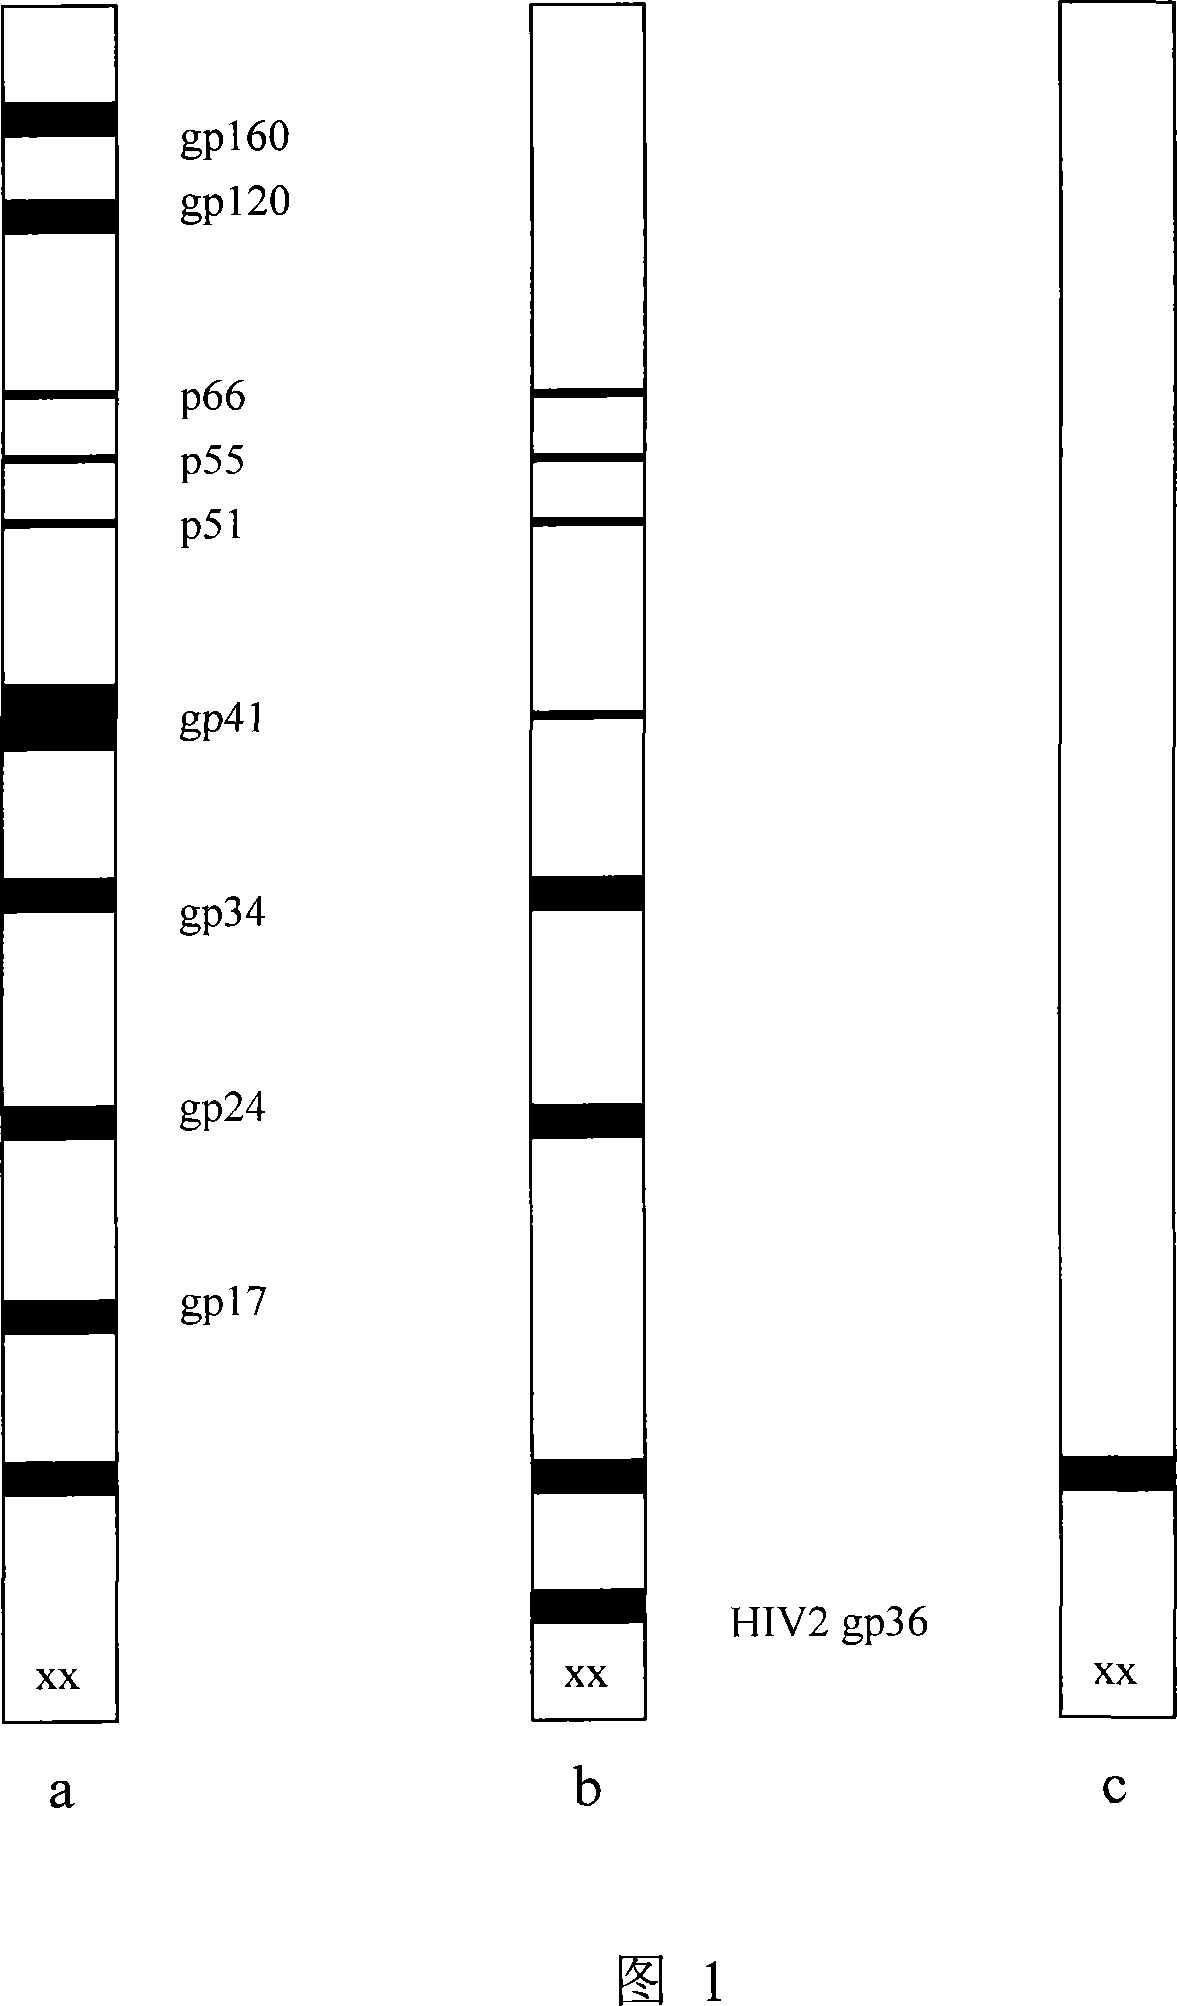 Method for measuring specificity HIV antibody generated by human immunodeficiency virus (1+2 type) different antigen epitope